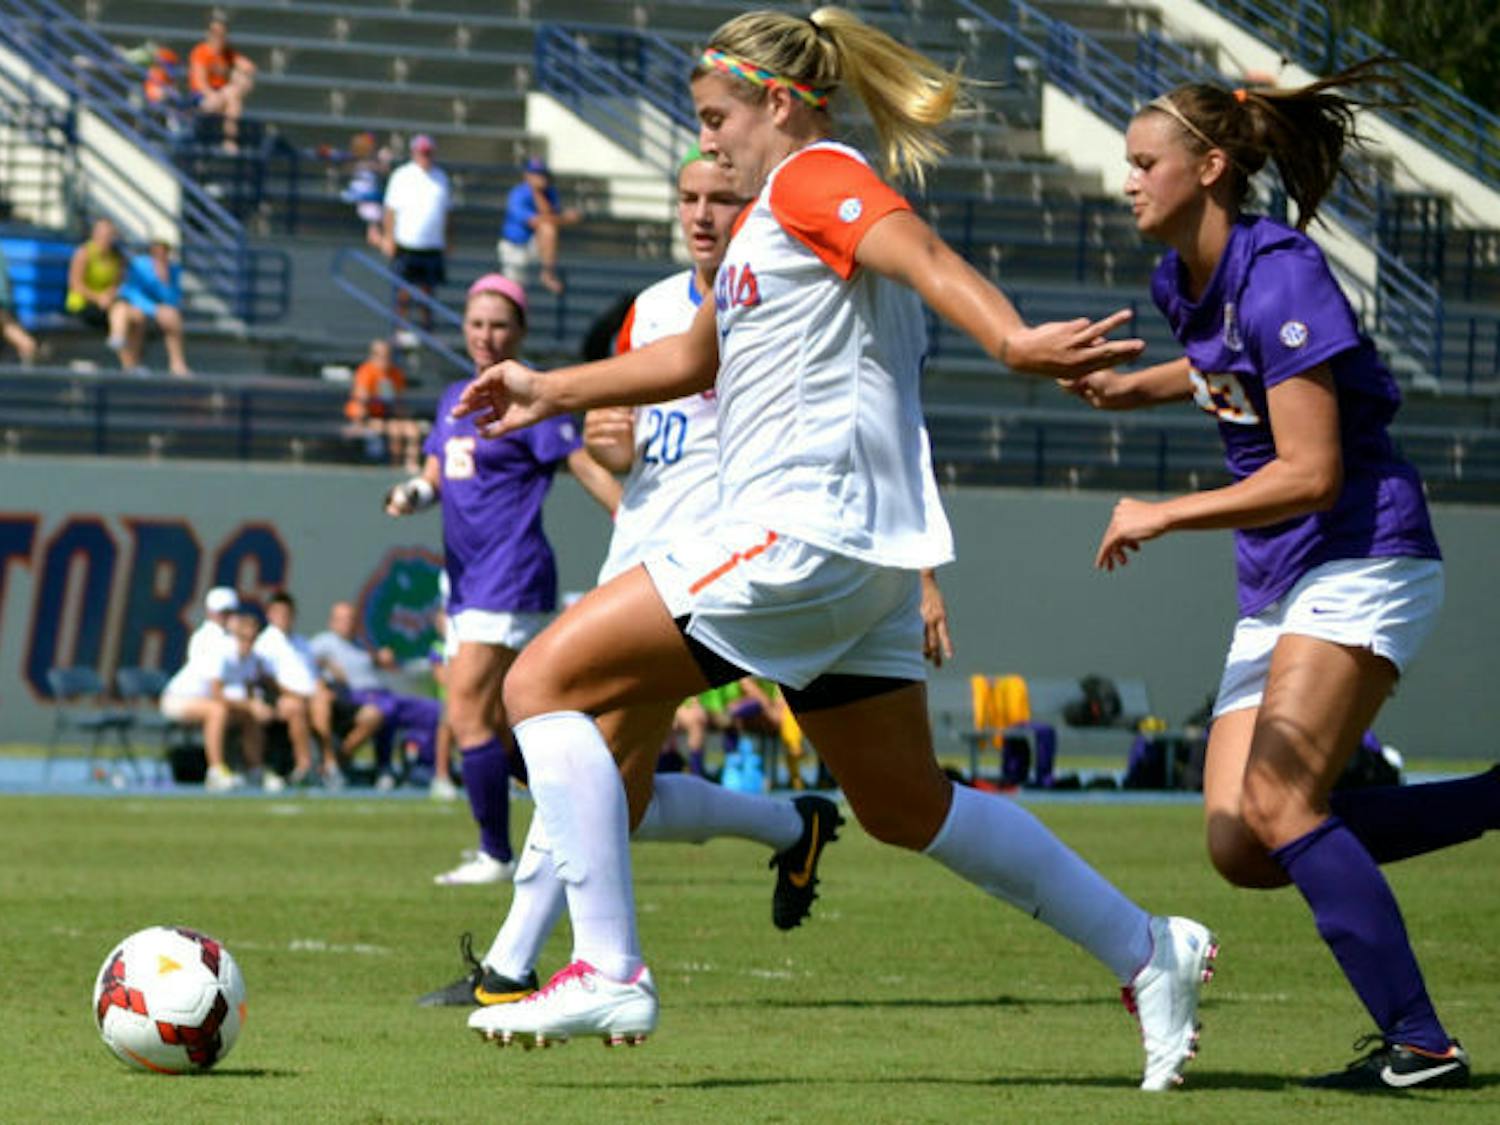 Savannah Jordan runs the ball down the field during Florida’s 3-0 win against LSU on Saturday at James G. Pressly Stadium. Jordan scored twice in the Gators’ victory against the Tigers.